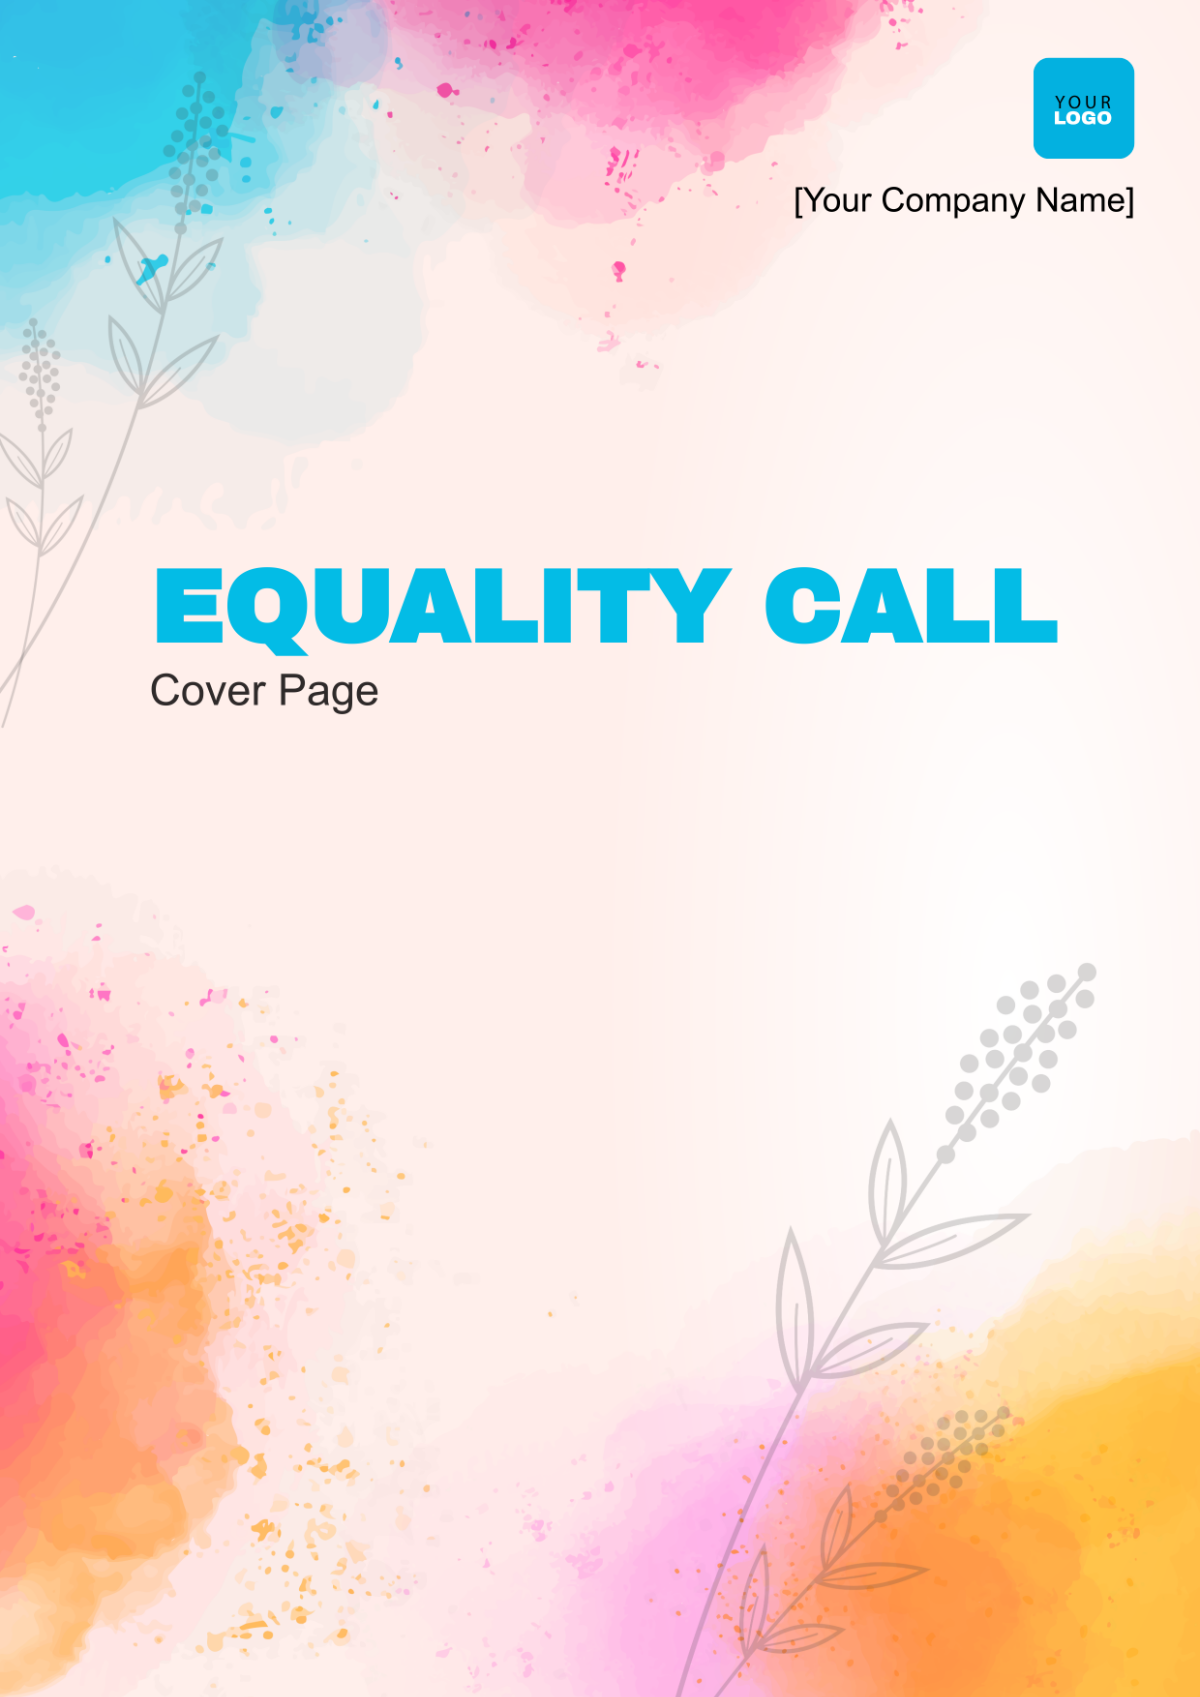 Equality Call Cover Page Template